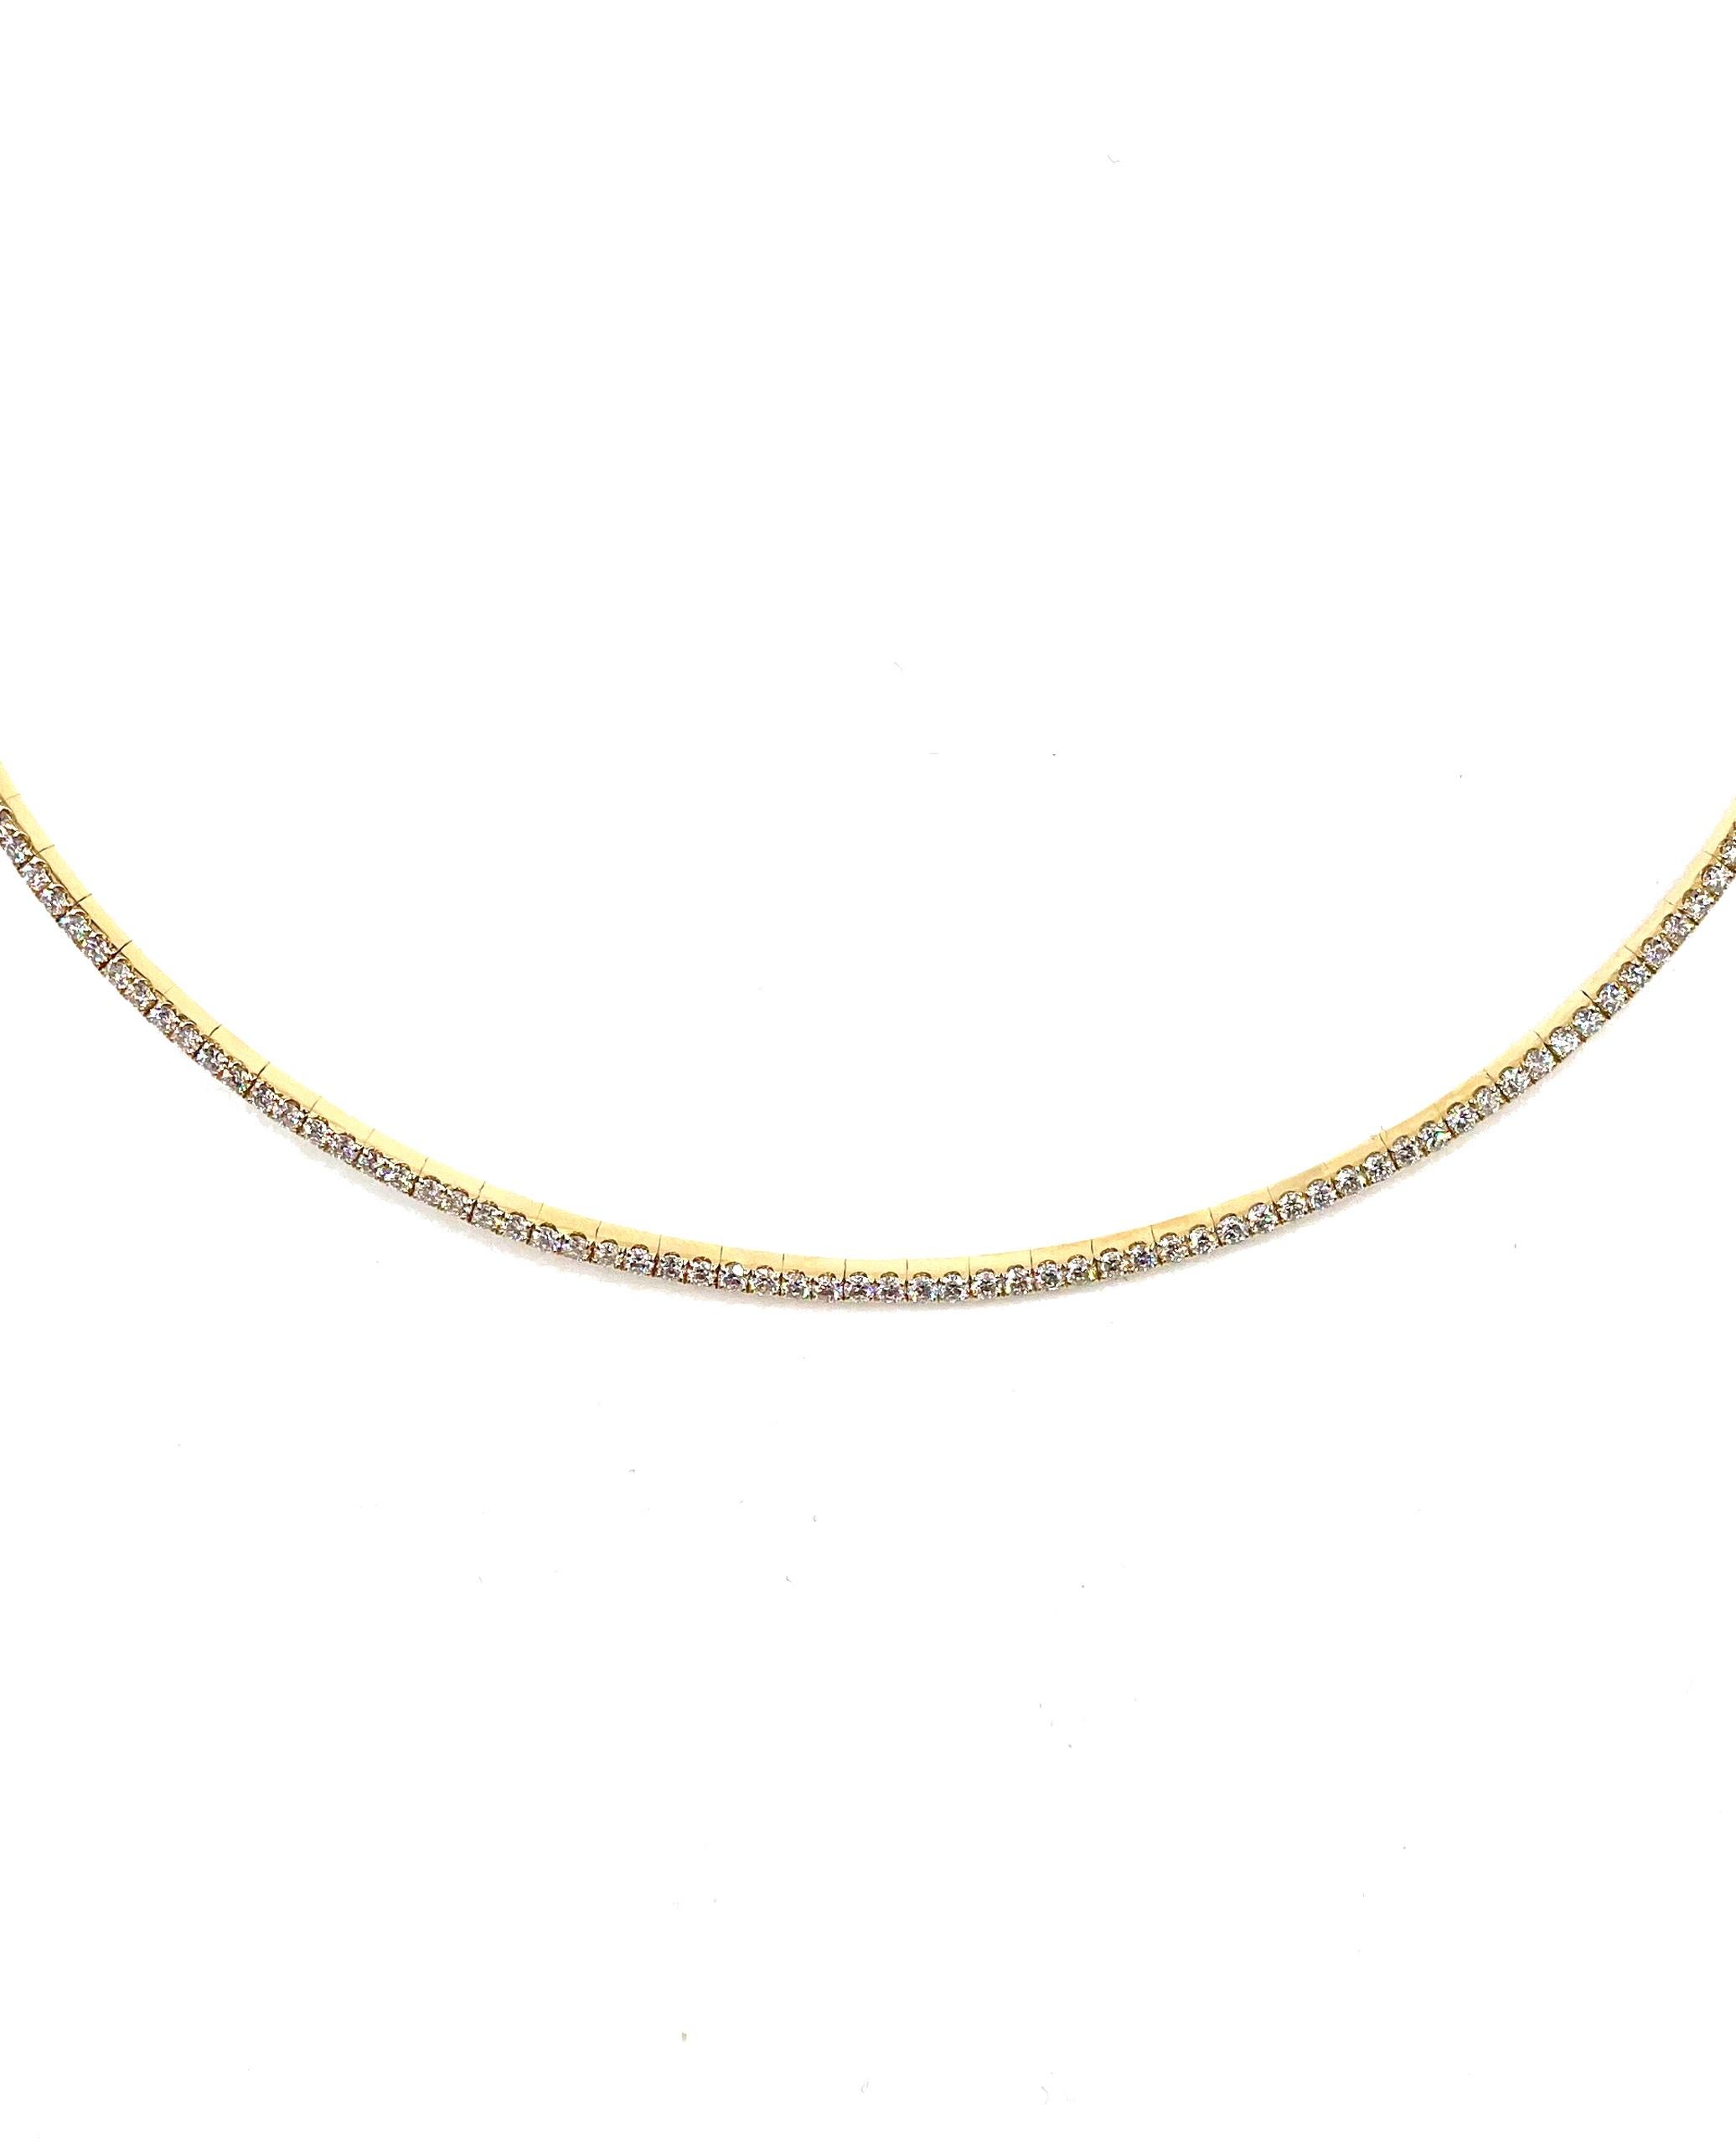 Contemporary 18K Yellow Gold Diamond Collar Tennis Necklace For Sale